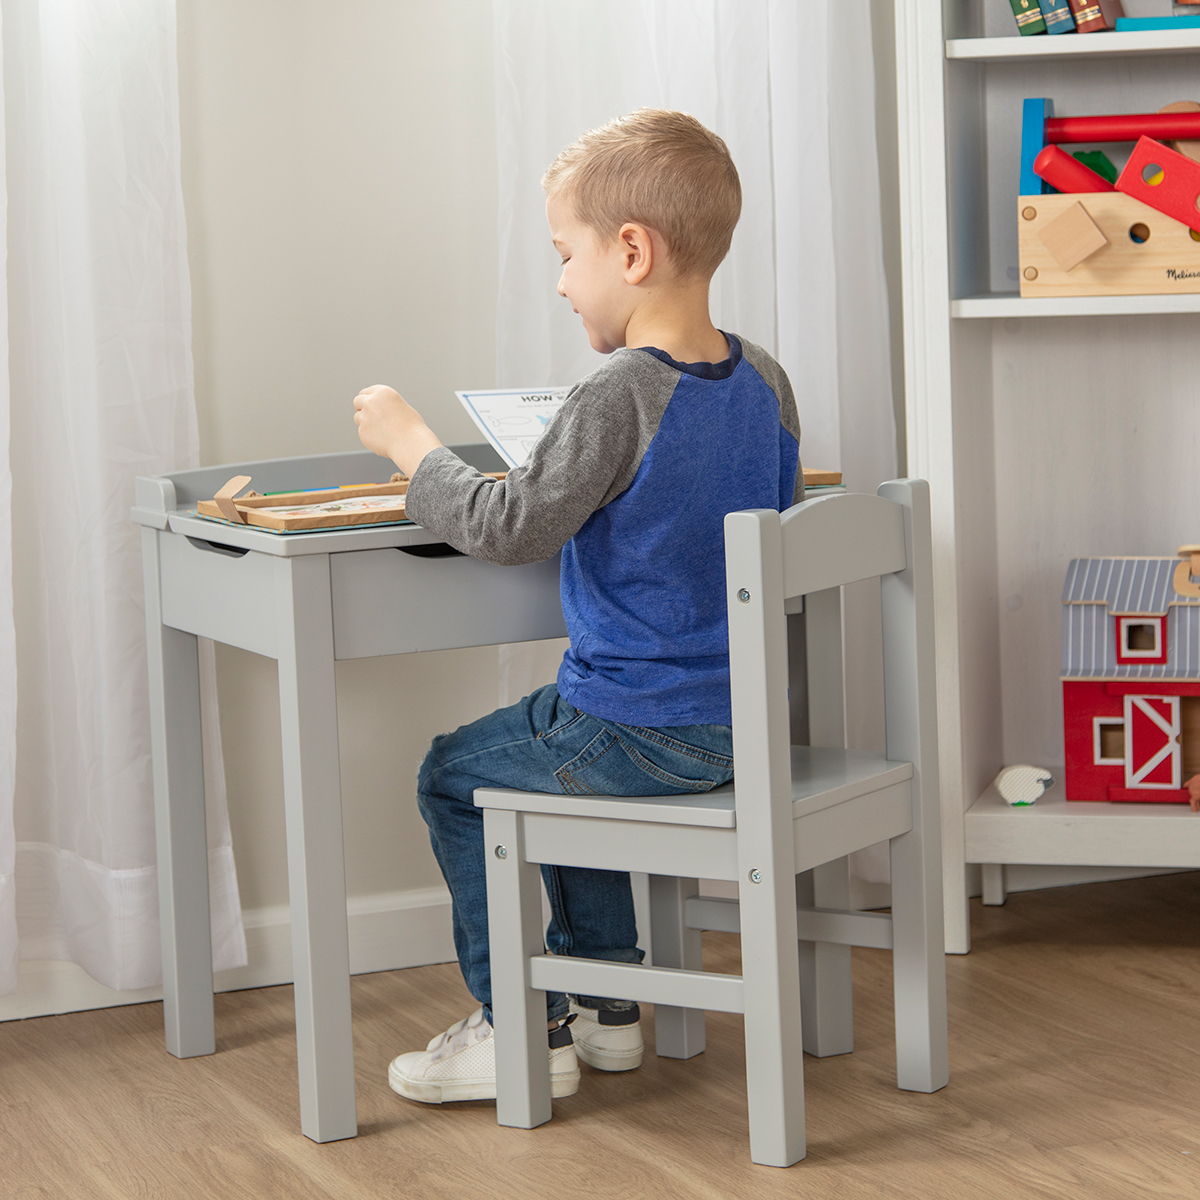 Melissa & Doug(R) Wooden Lift-Top Desk And Chair